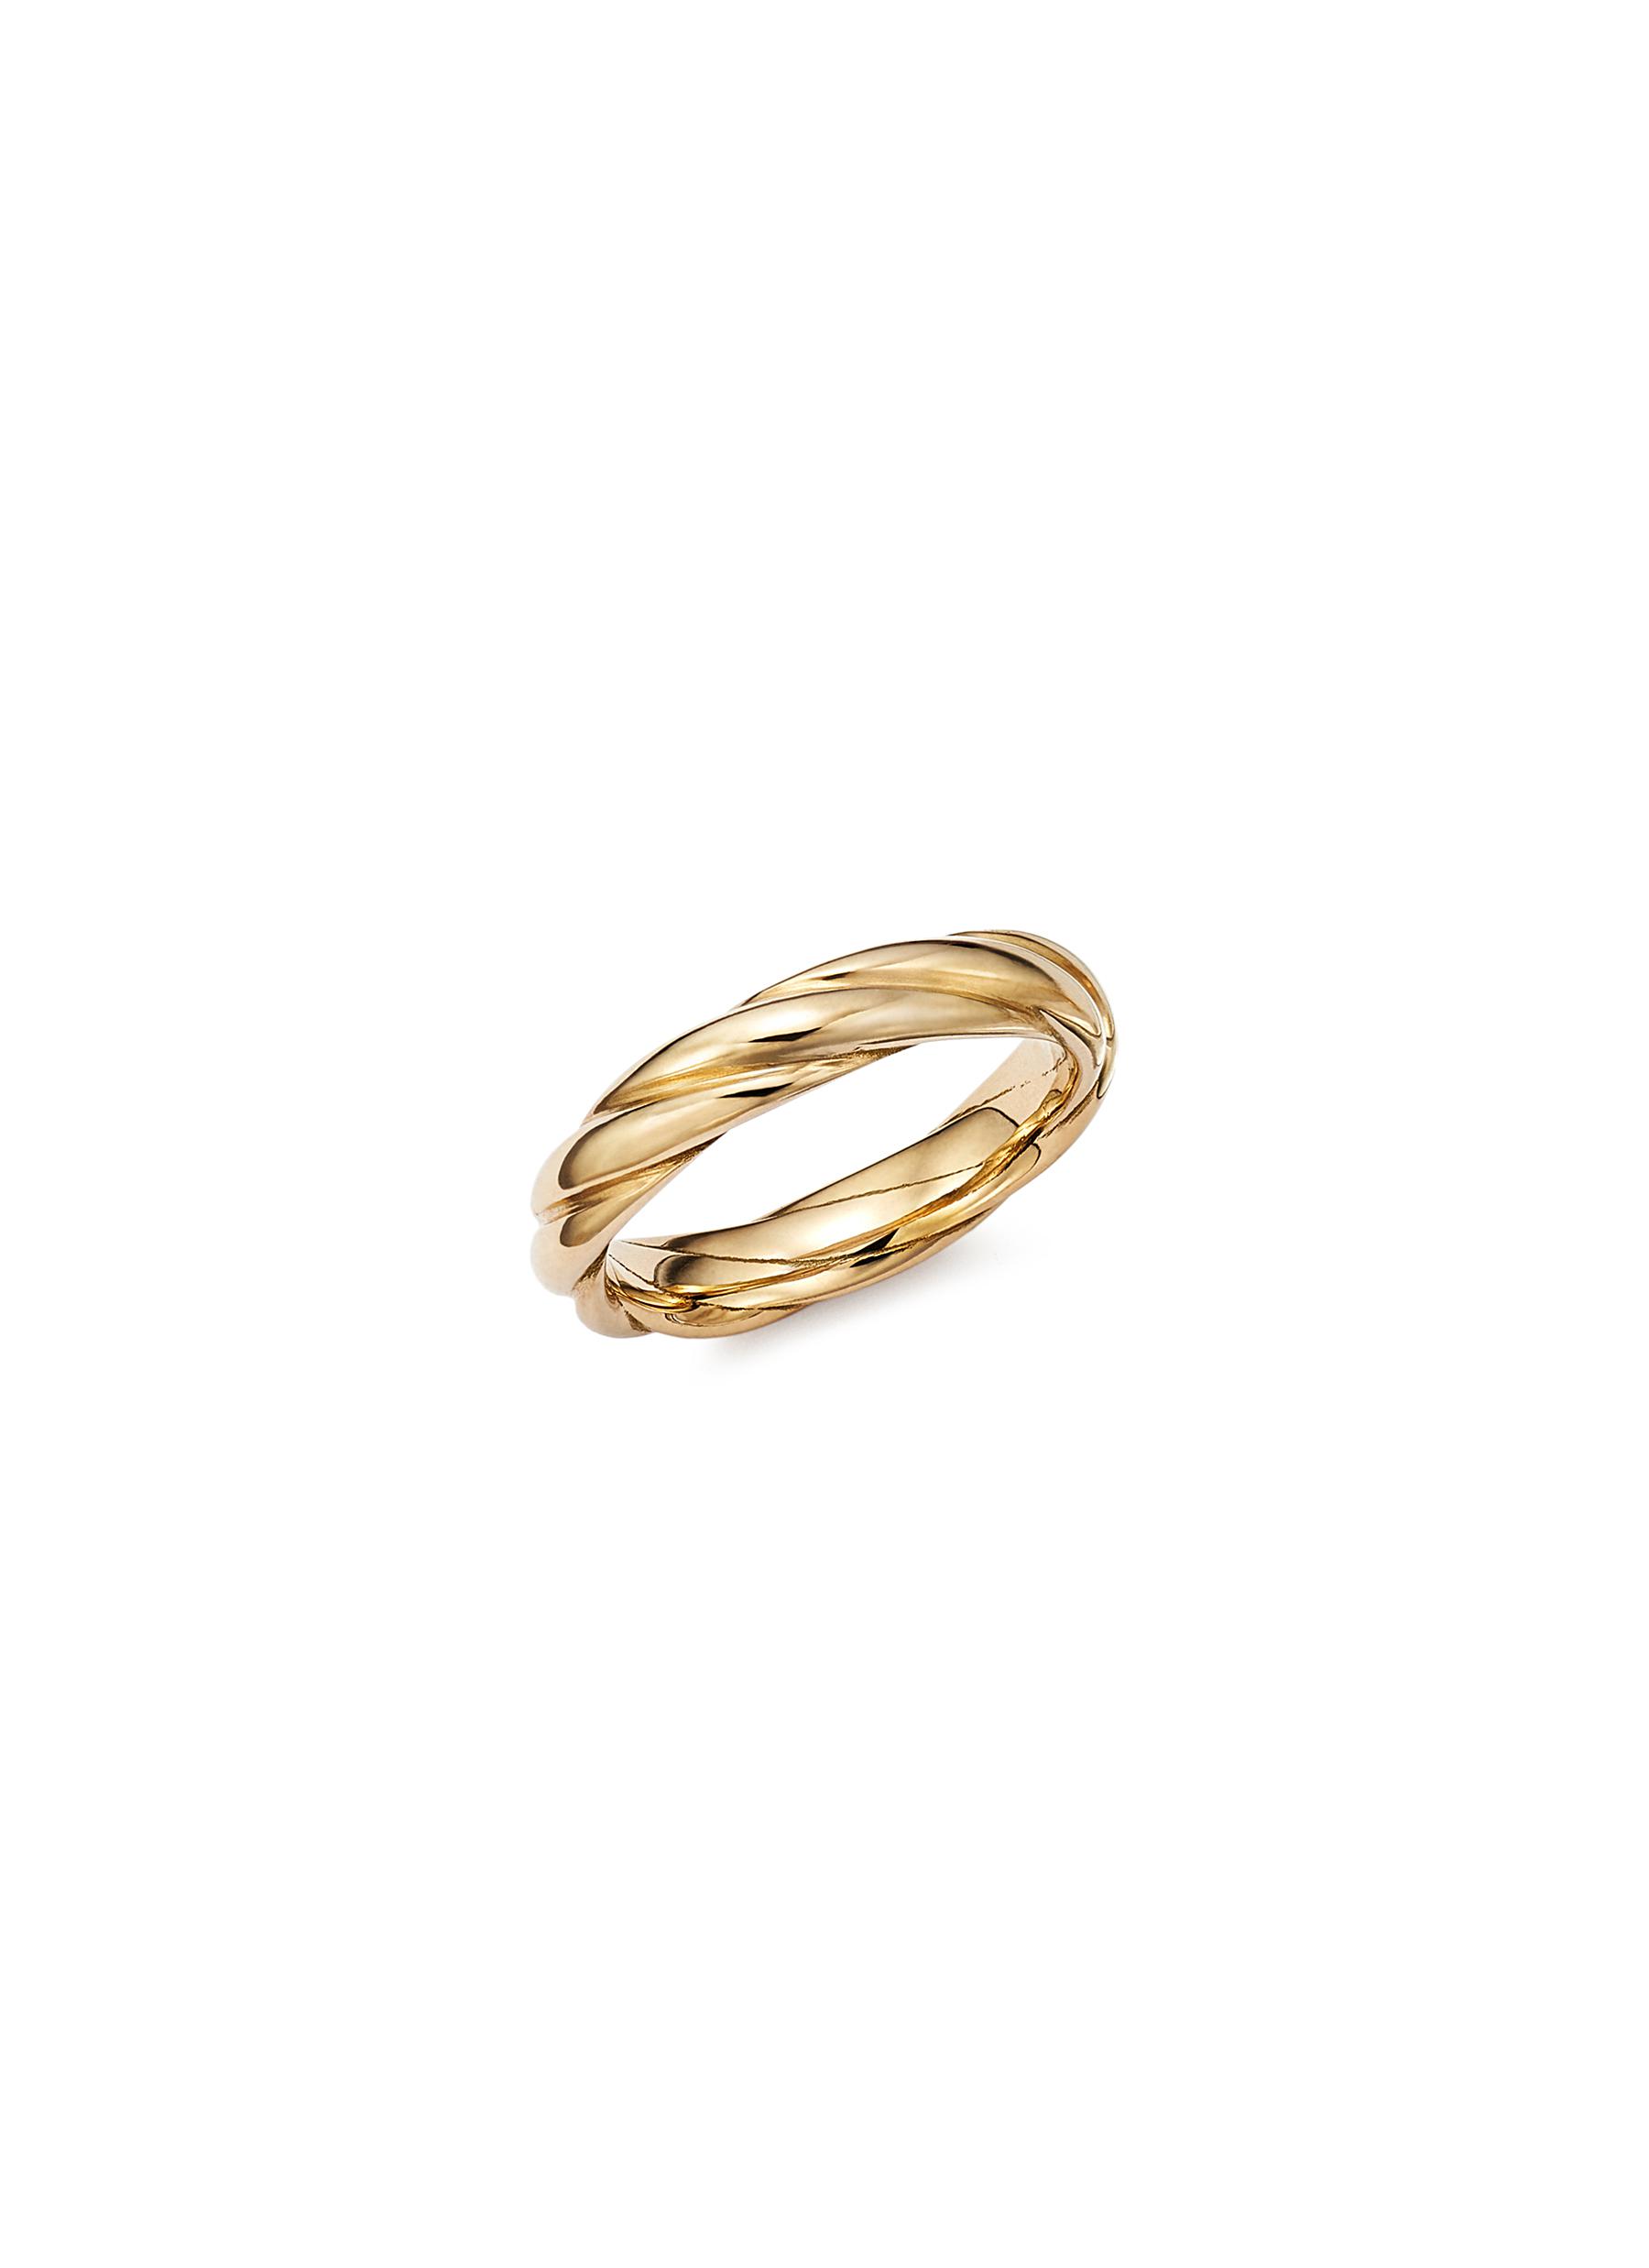 FUTURA ‘TENDERNESS' 18K FAIRMINED ECOLOGICAL GOLD RING